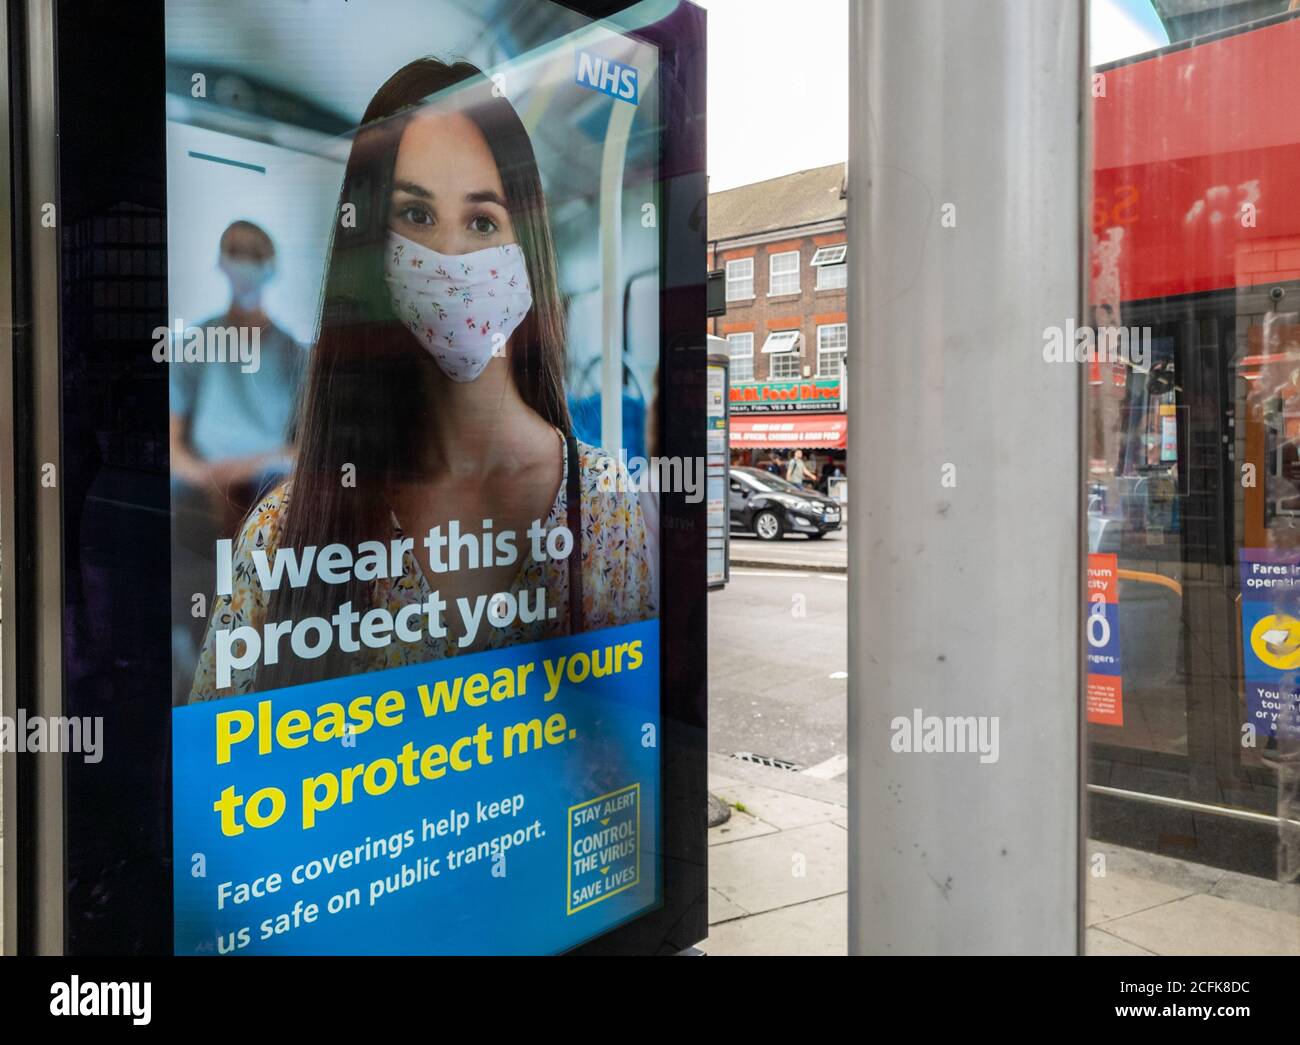 Billboard advertisement by the NHS telling people to wear a face covering as a Covid-19 pandemic safety measure. Stock Photo